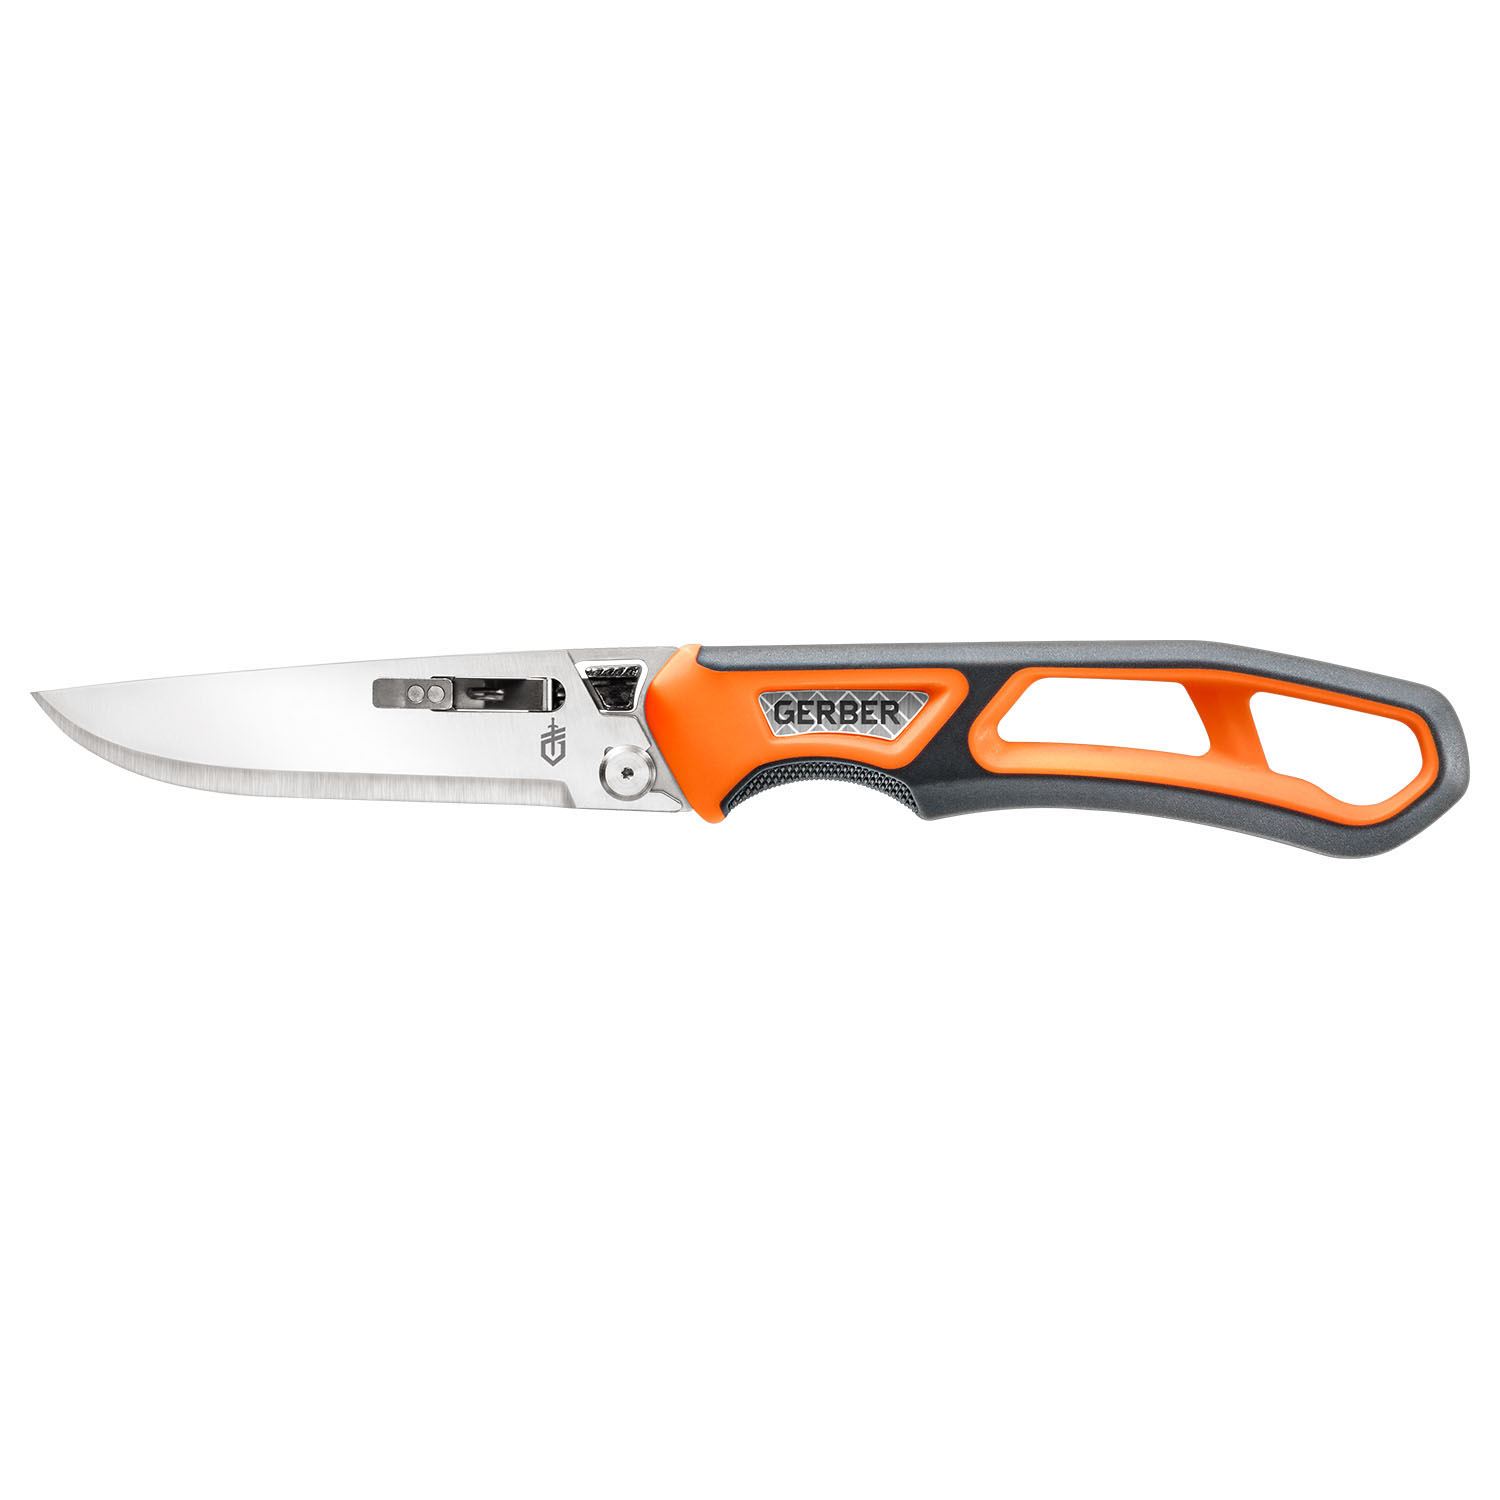 Gerber Randy Newberg EBS Fixed Blade Knife , Up to $2.00 Off with